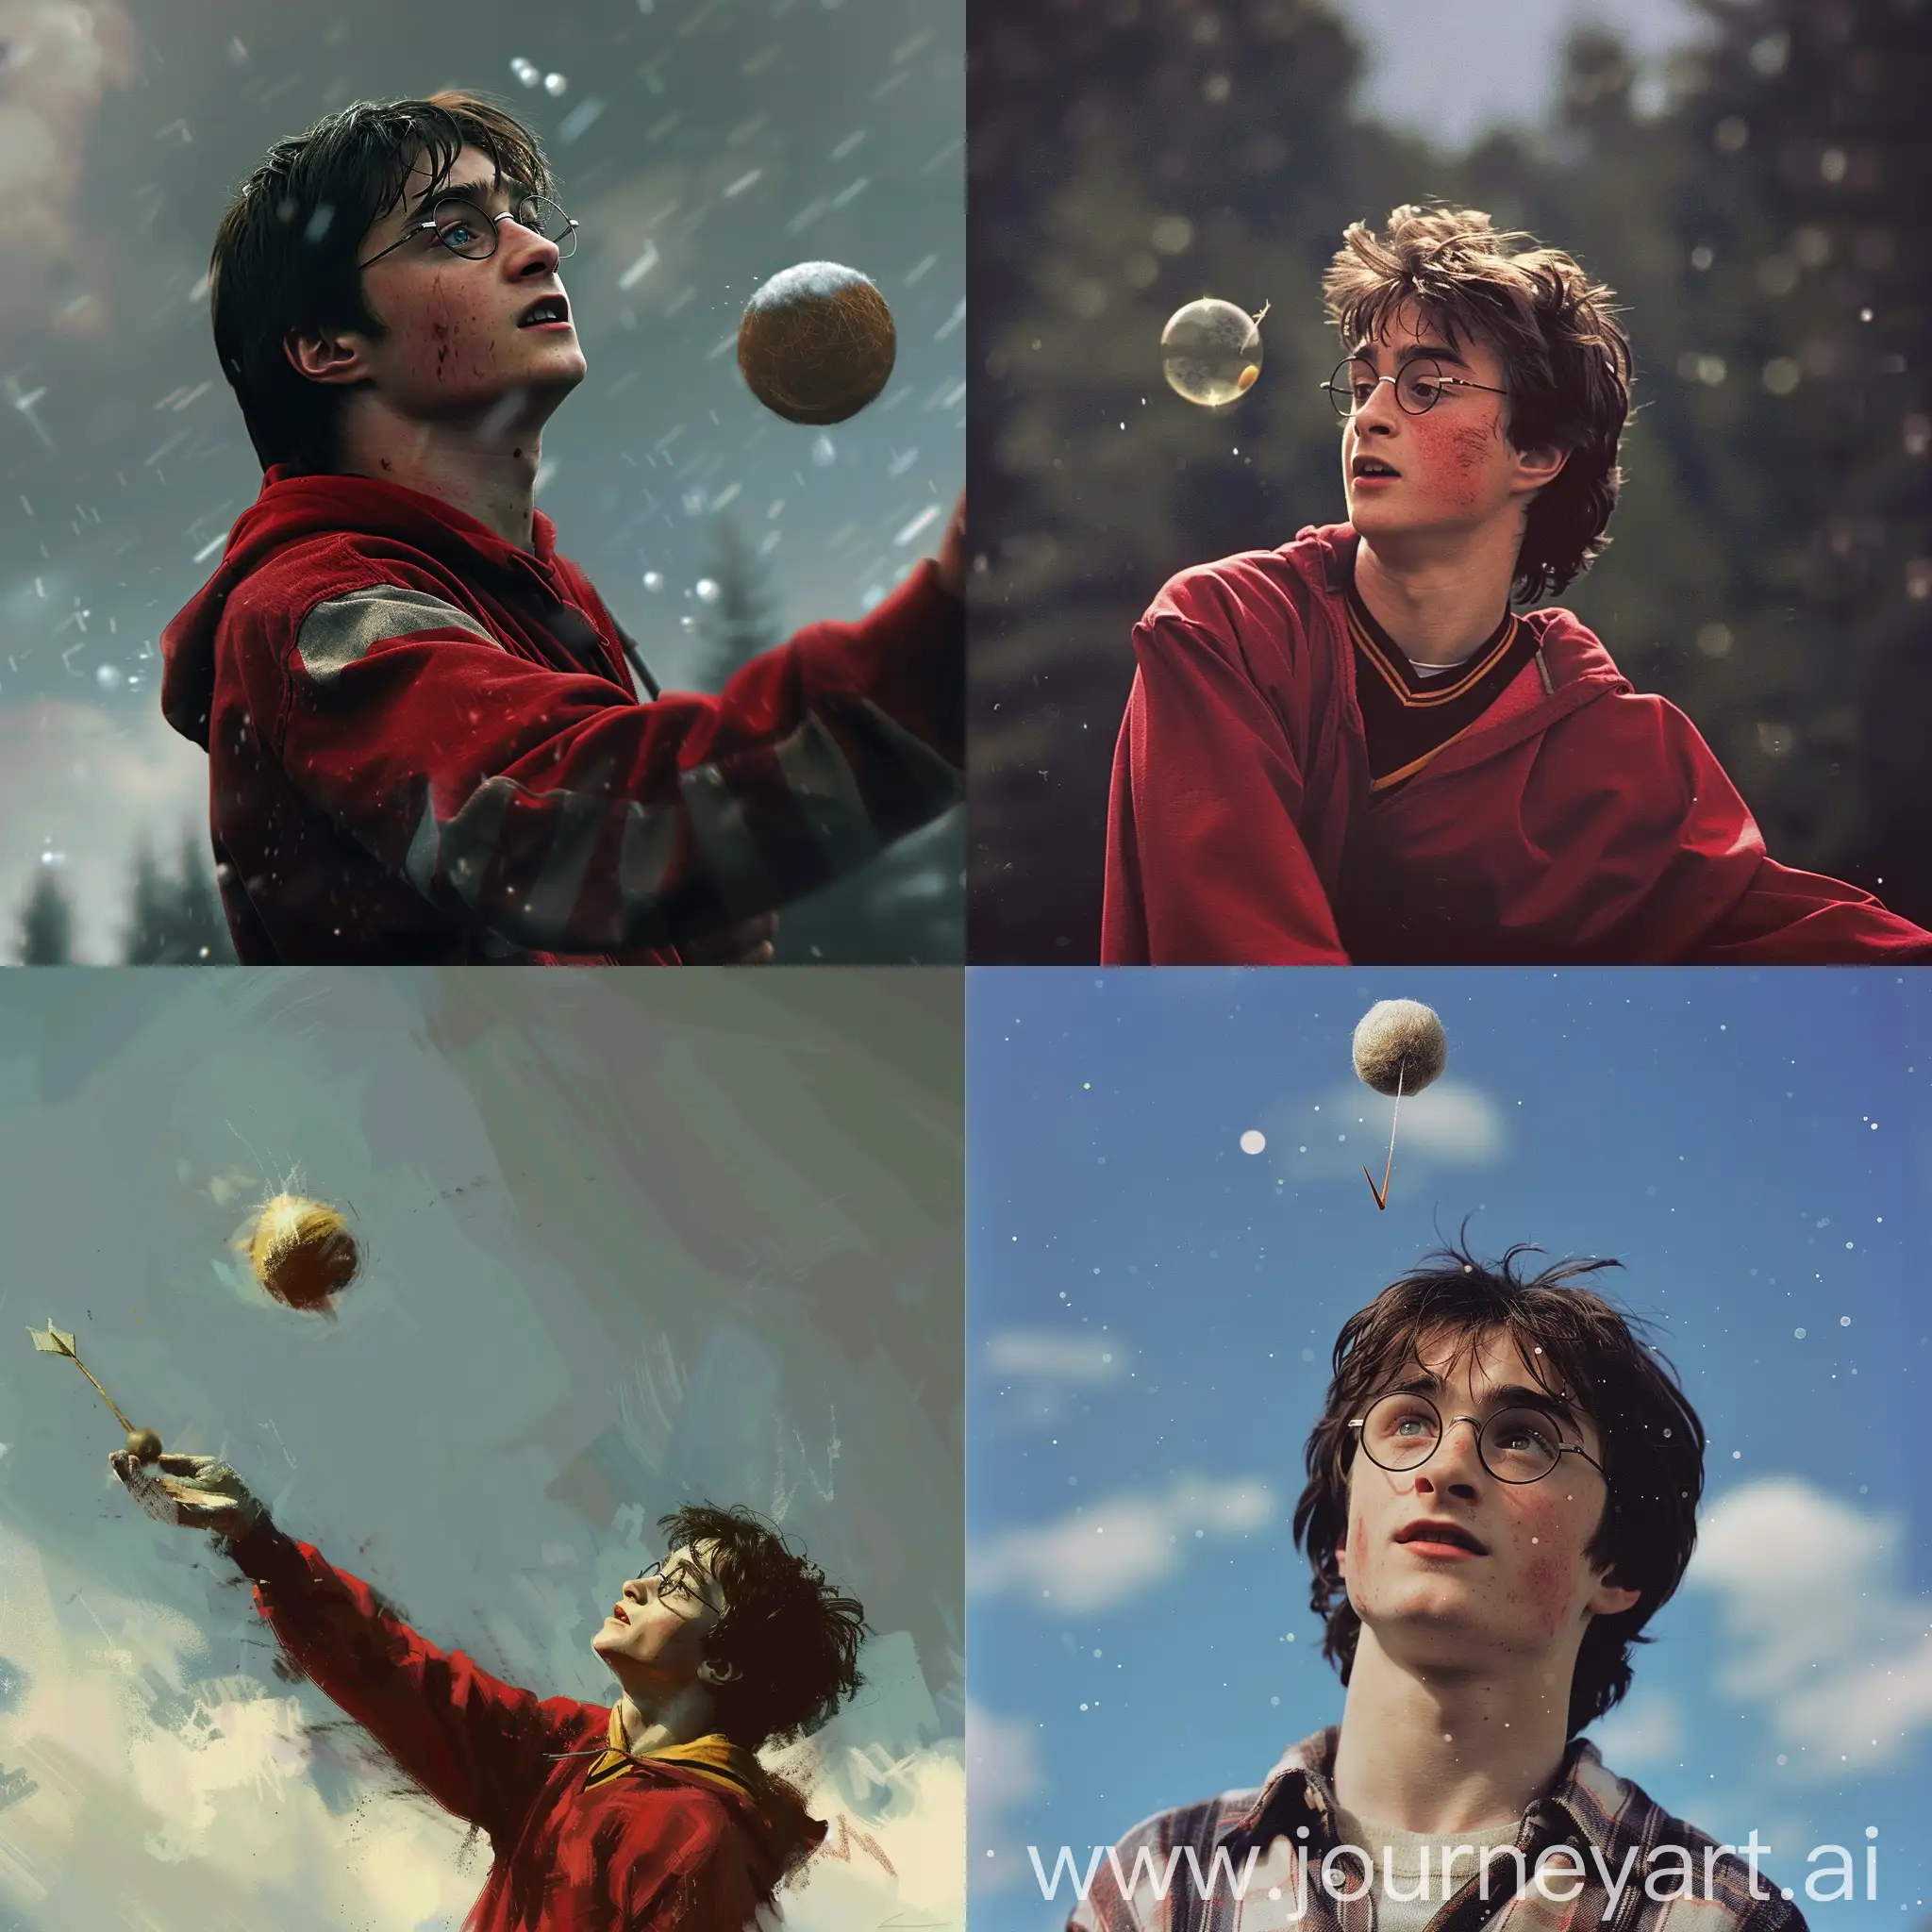 Harry-Potter-Character-Playing-Quidditch-Catching-the-Snitch